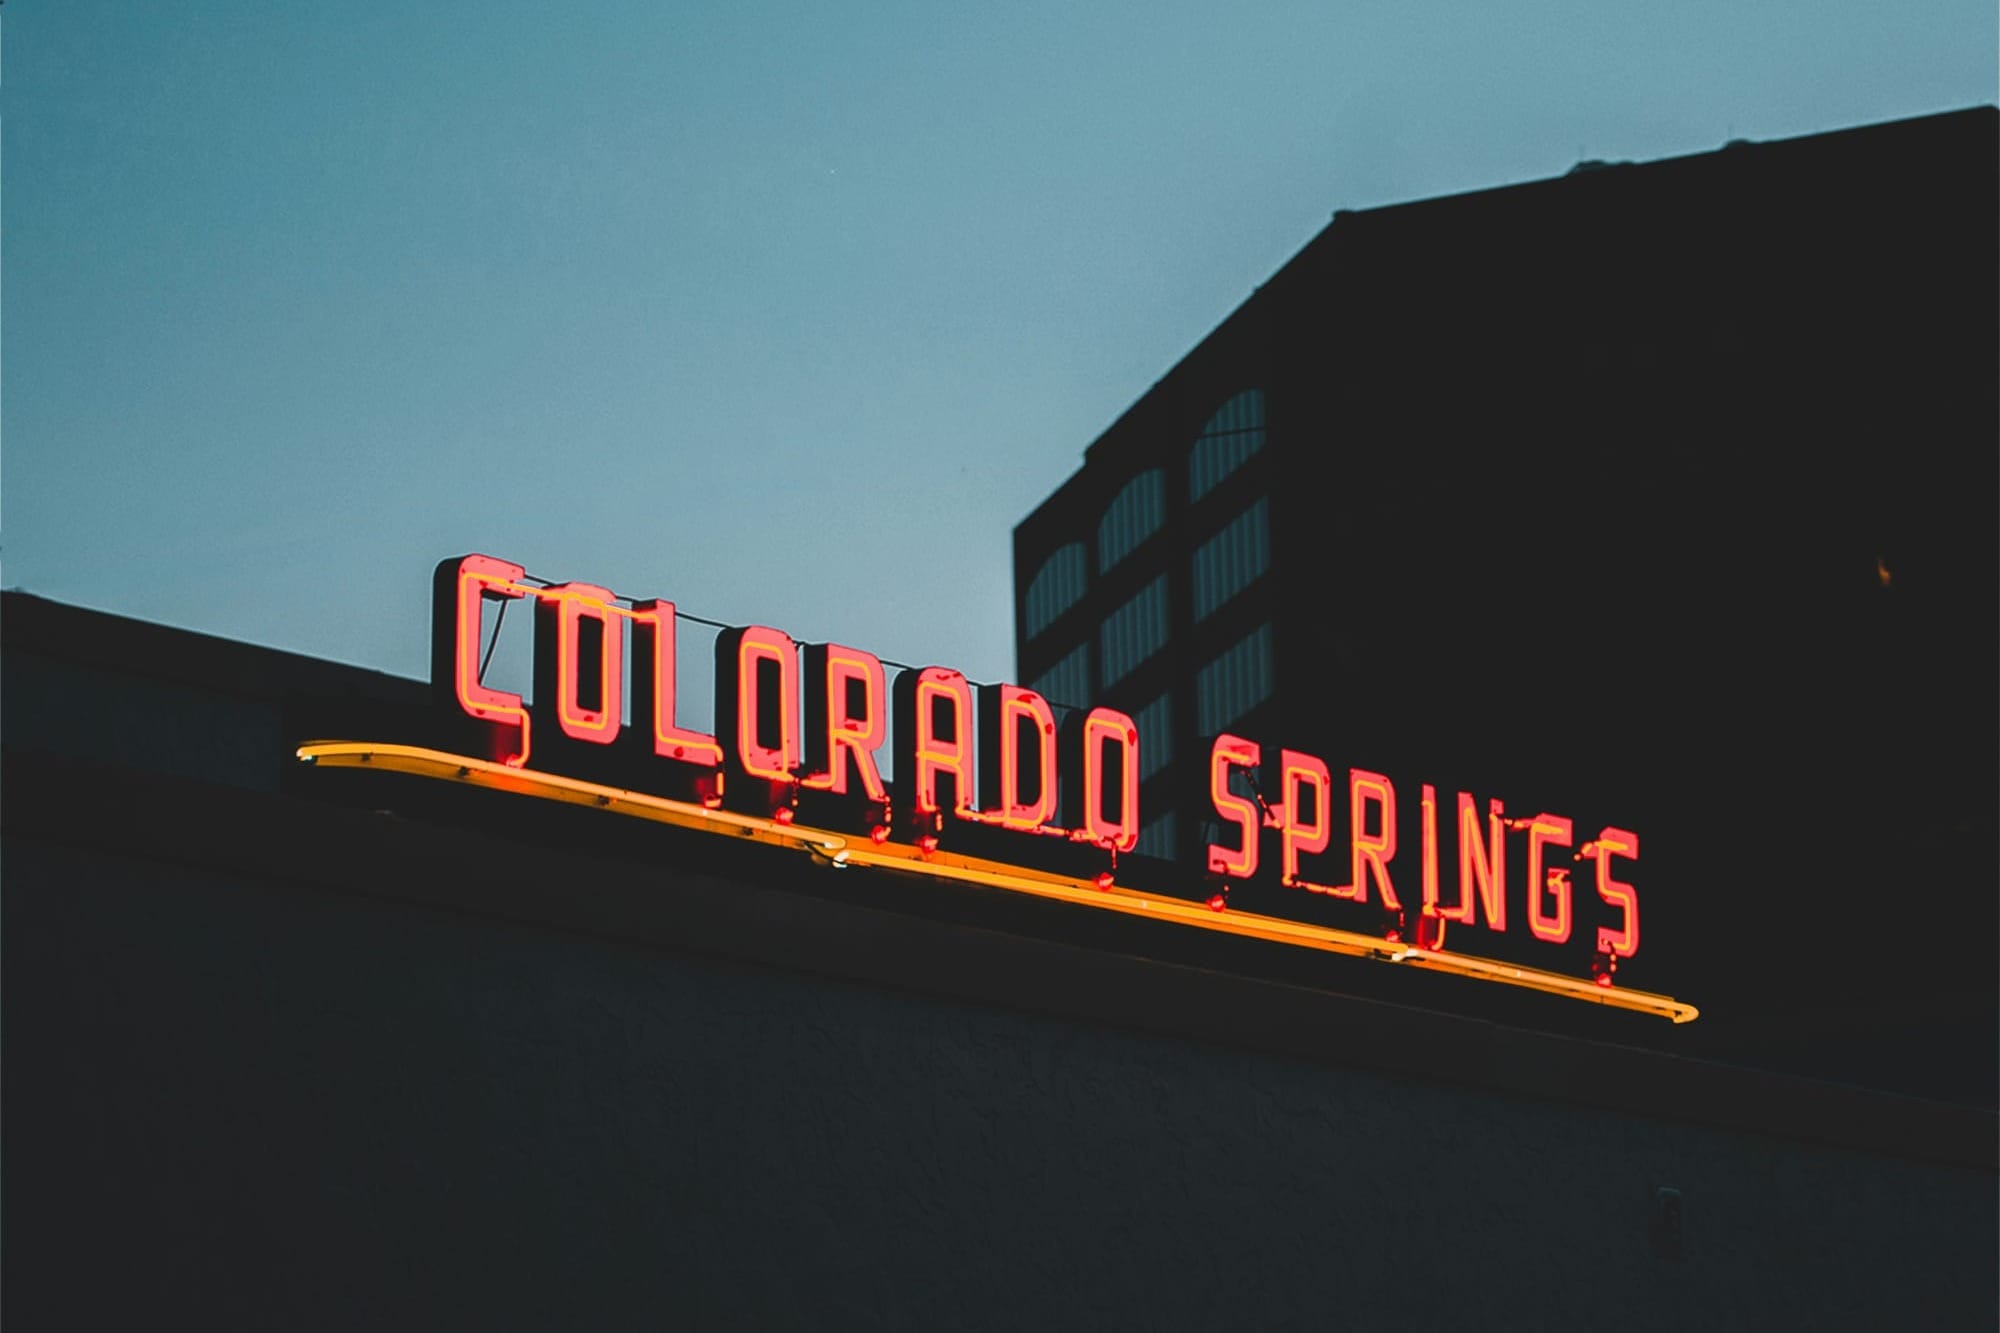 Exploring Colorado Springs: A Guide to Accessible Hotels